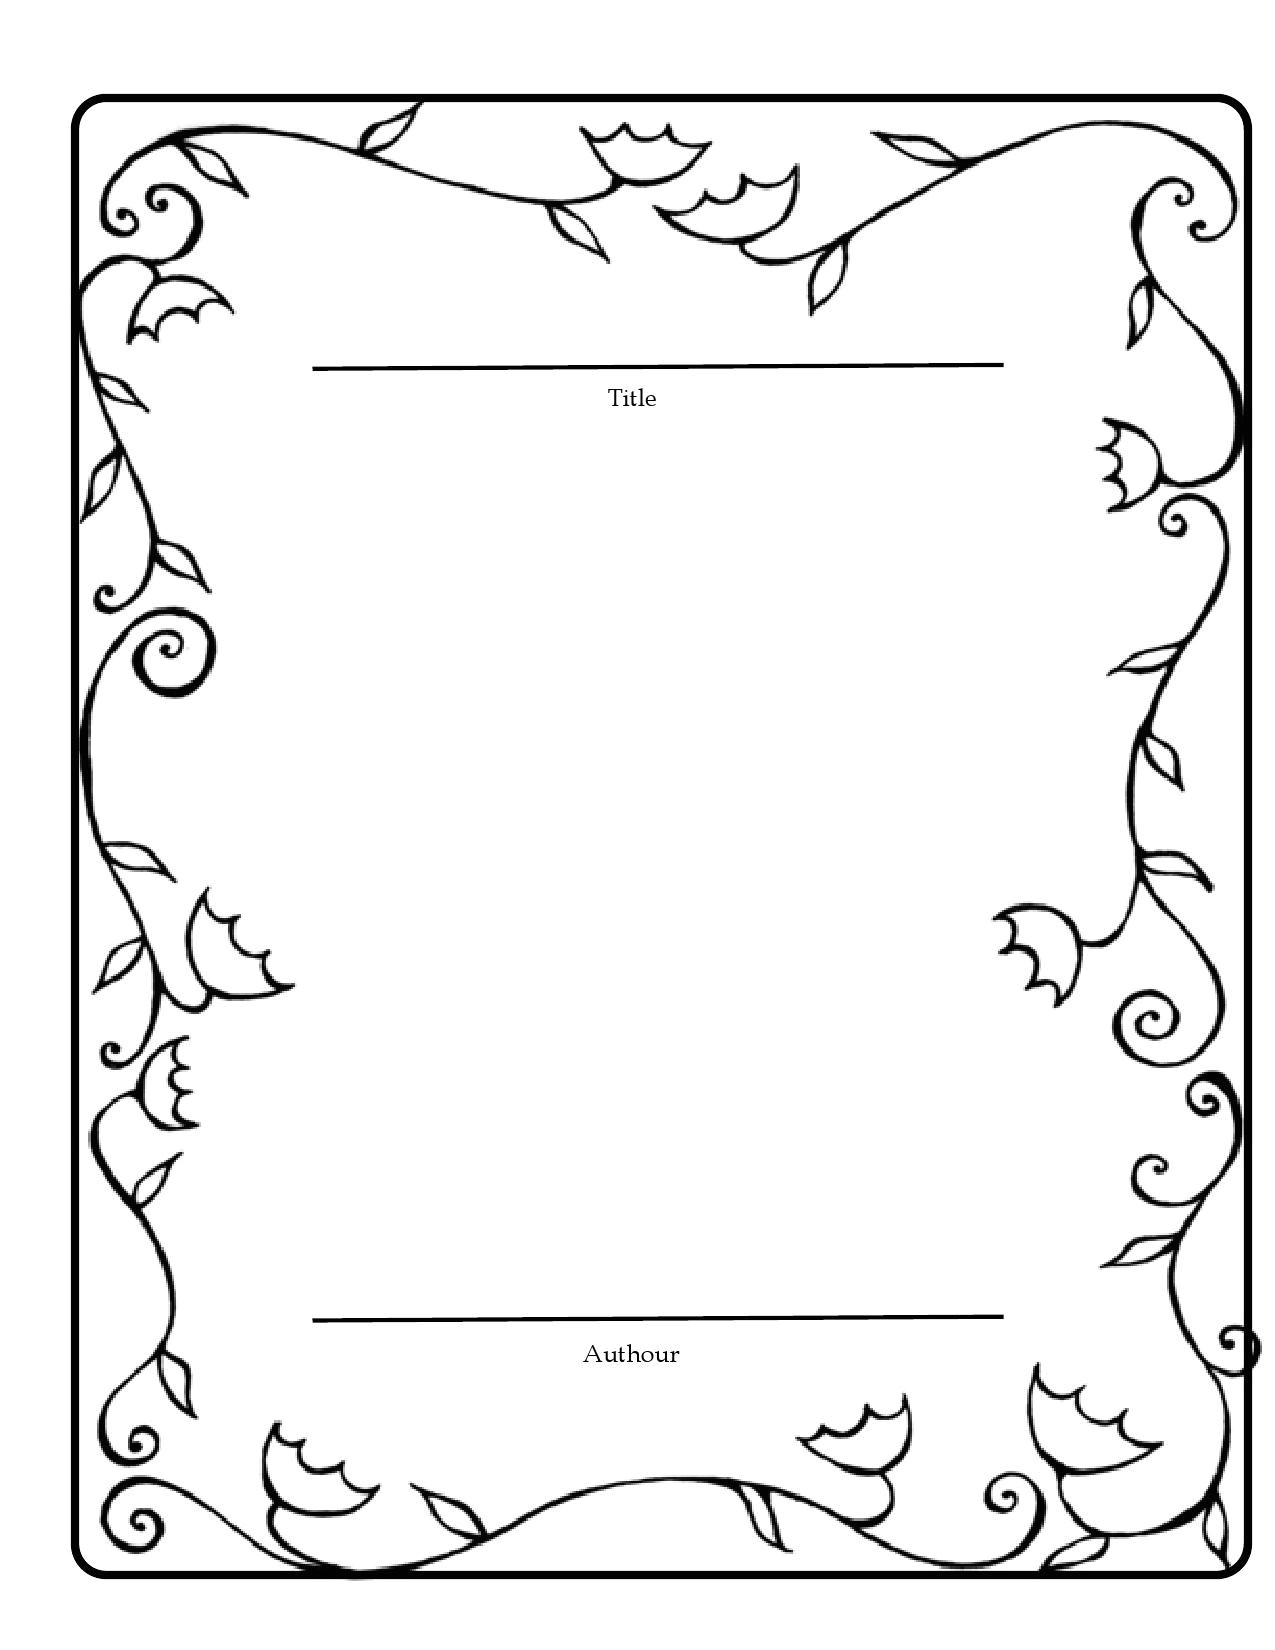 p fairy tale book layout template 216522